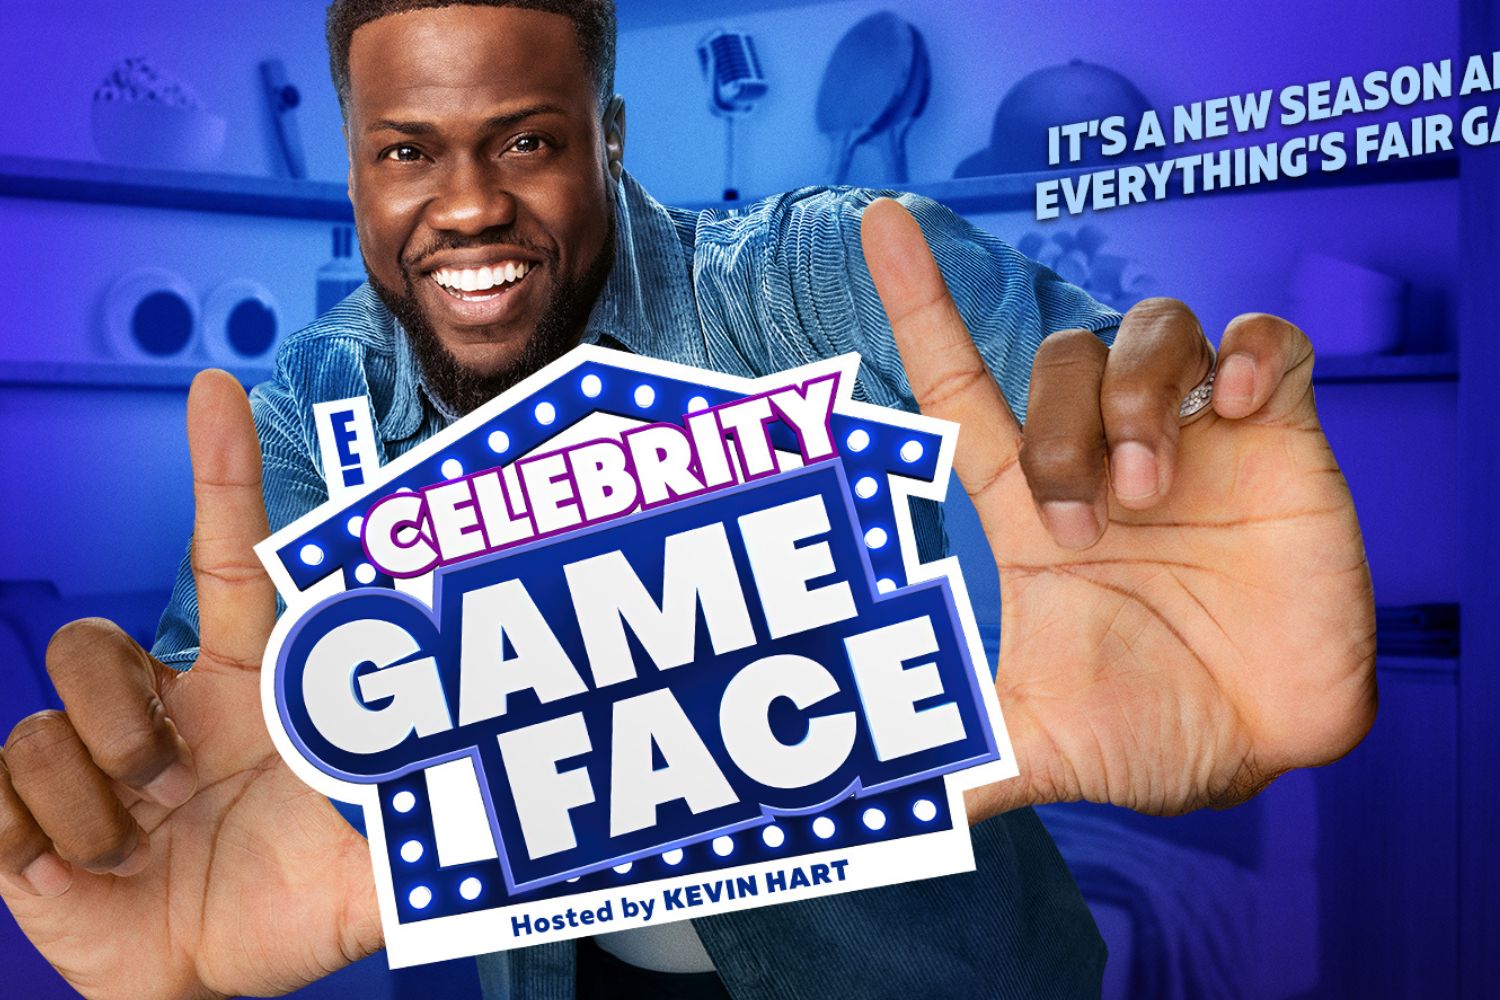 Celebrity Game Face show